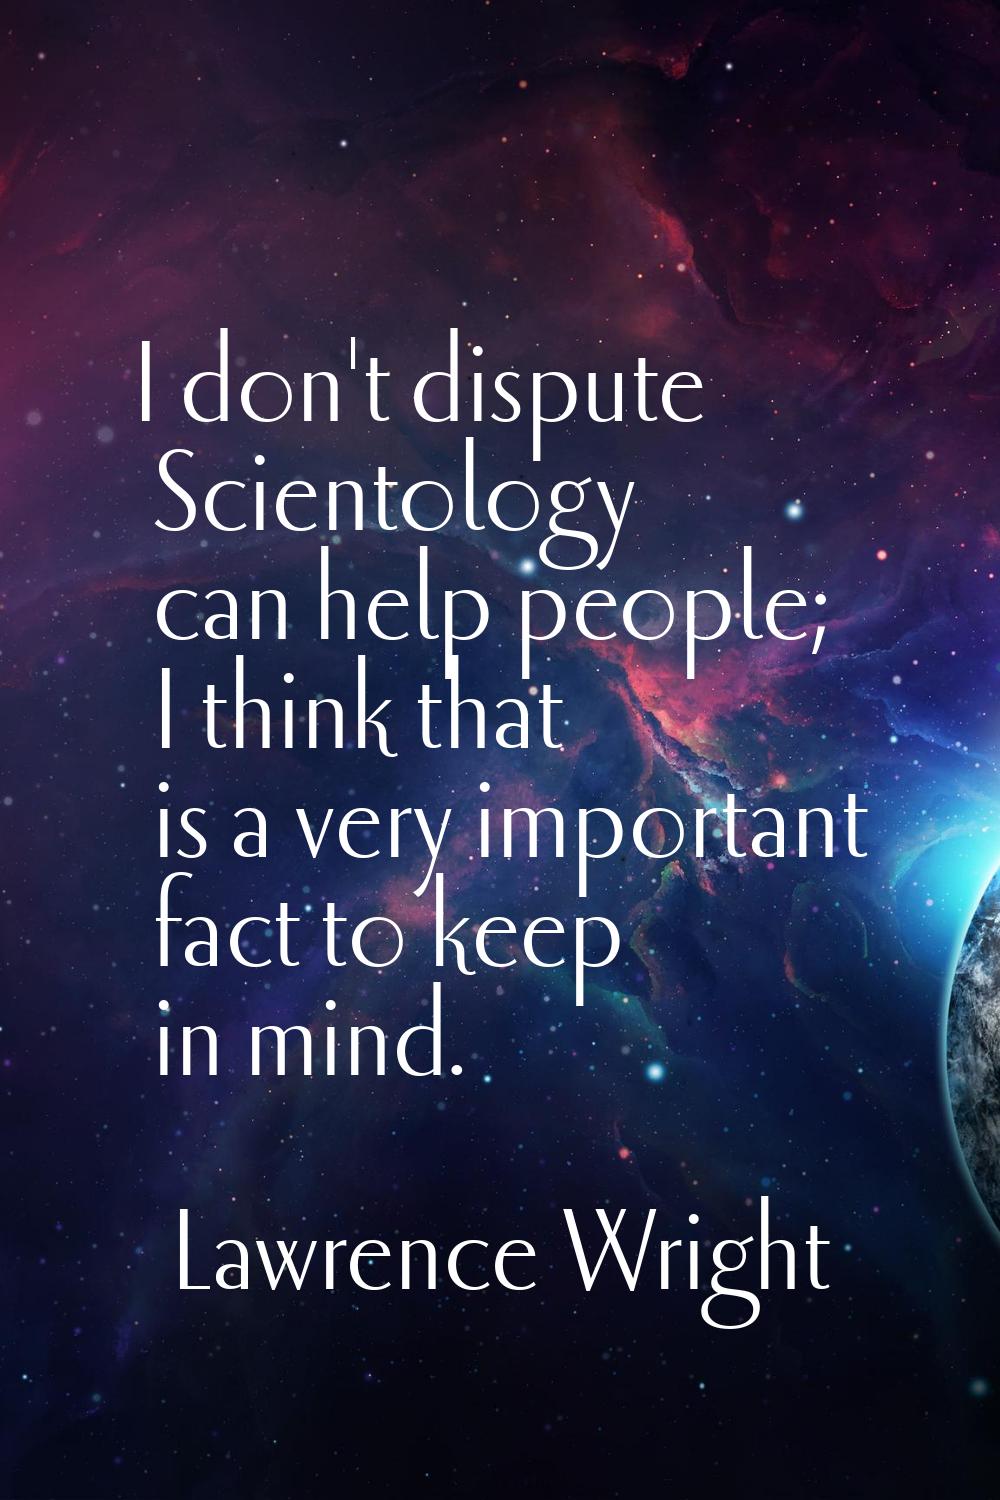 I don't dispute Scientology can help people; I think that is a very important fact to keep in mind.